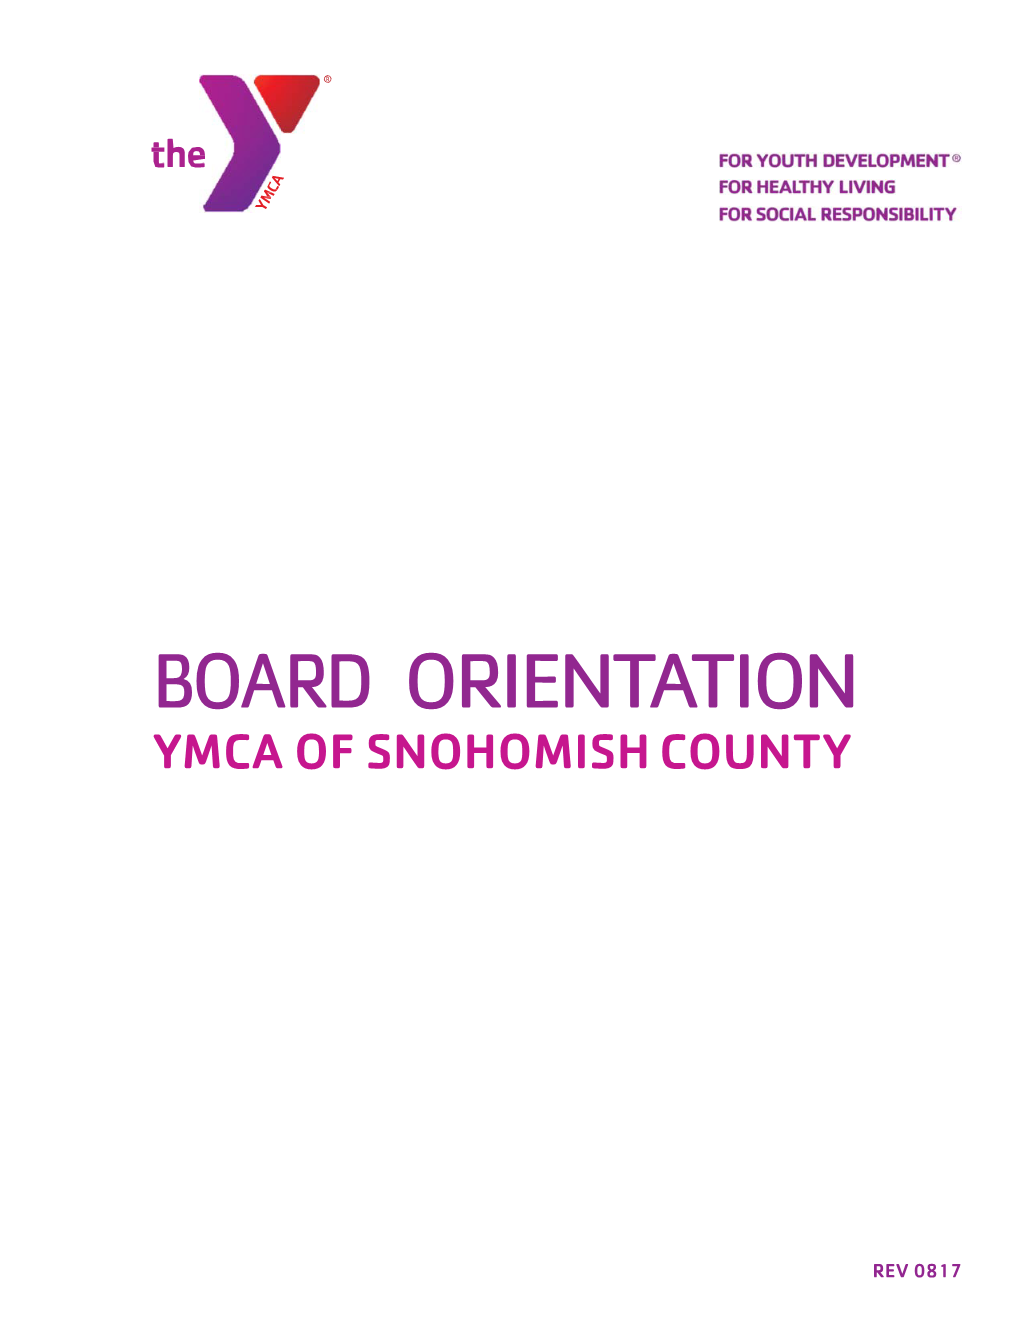 Board Orientation Manual Table of Contents